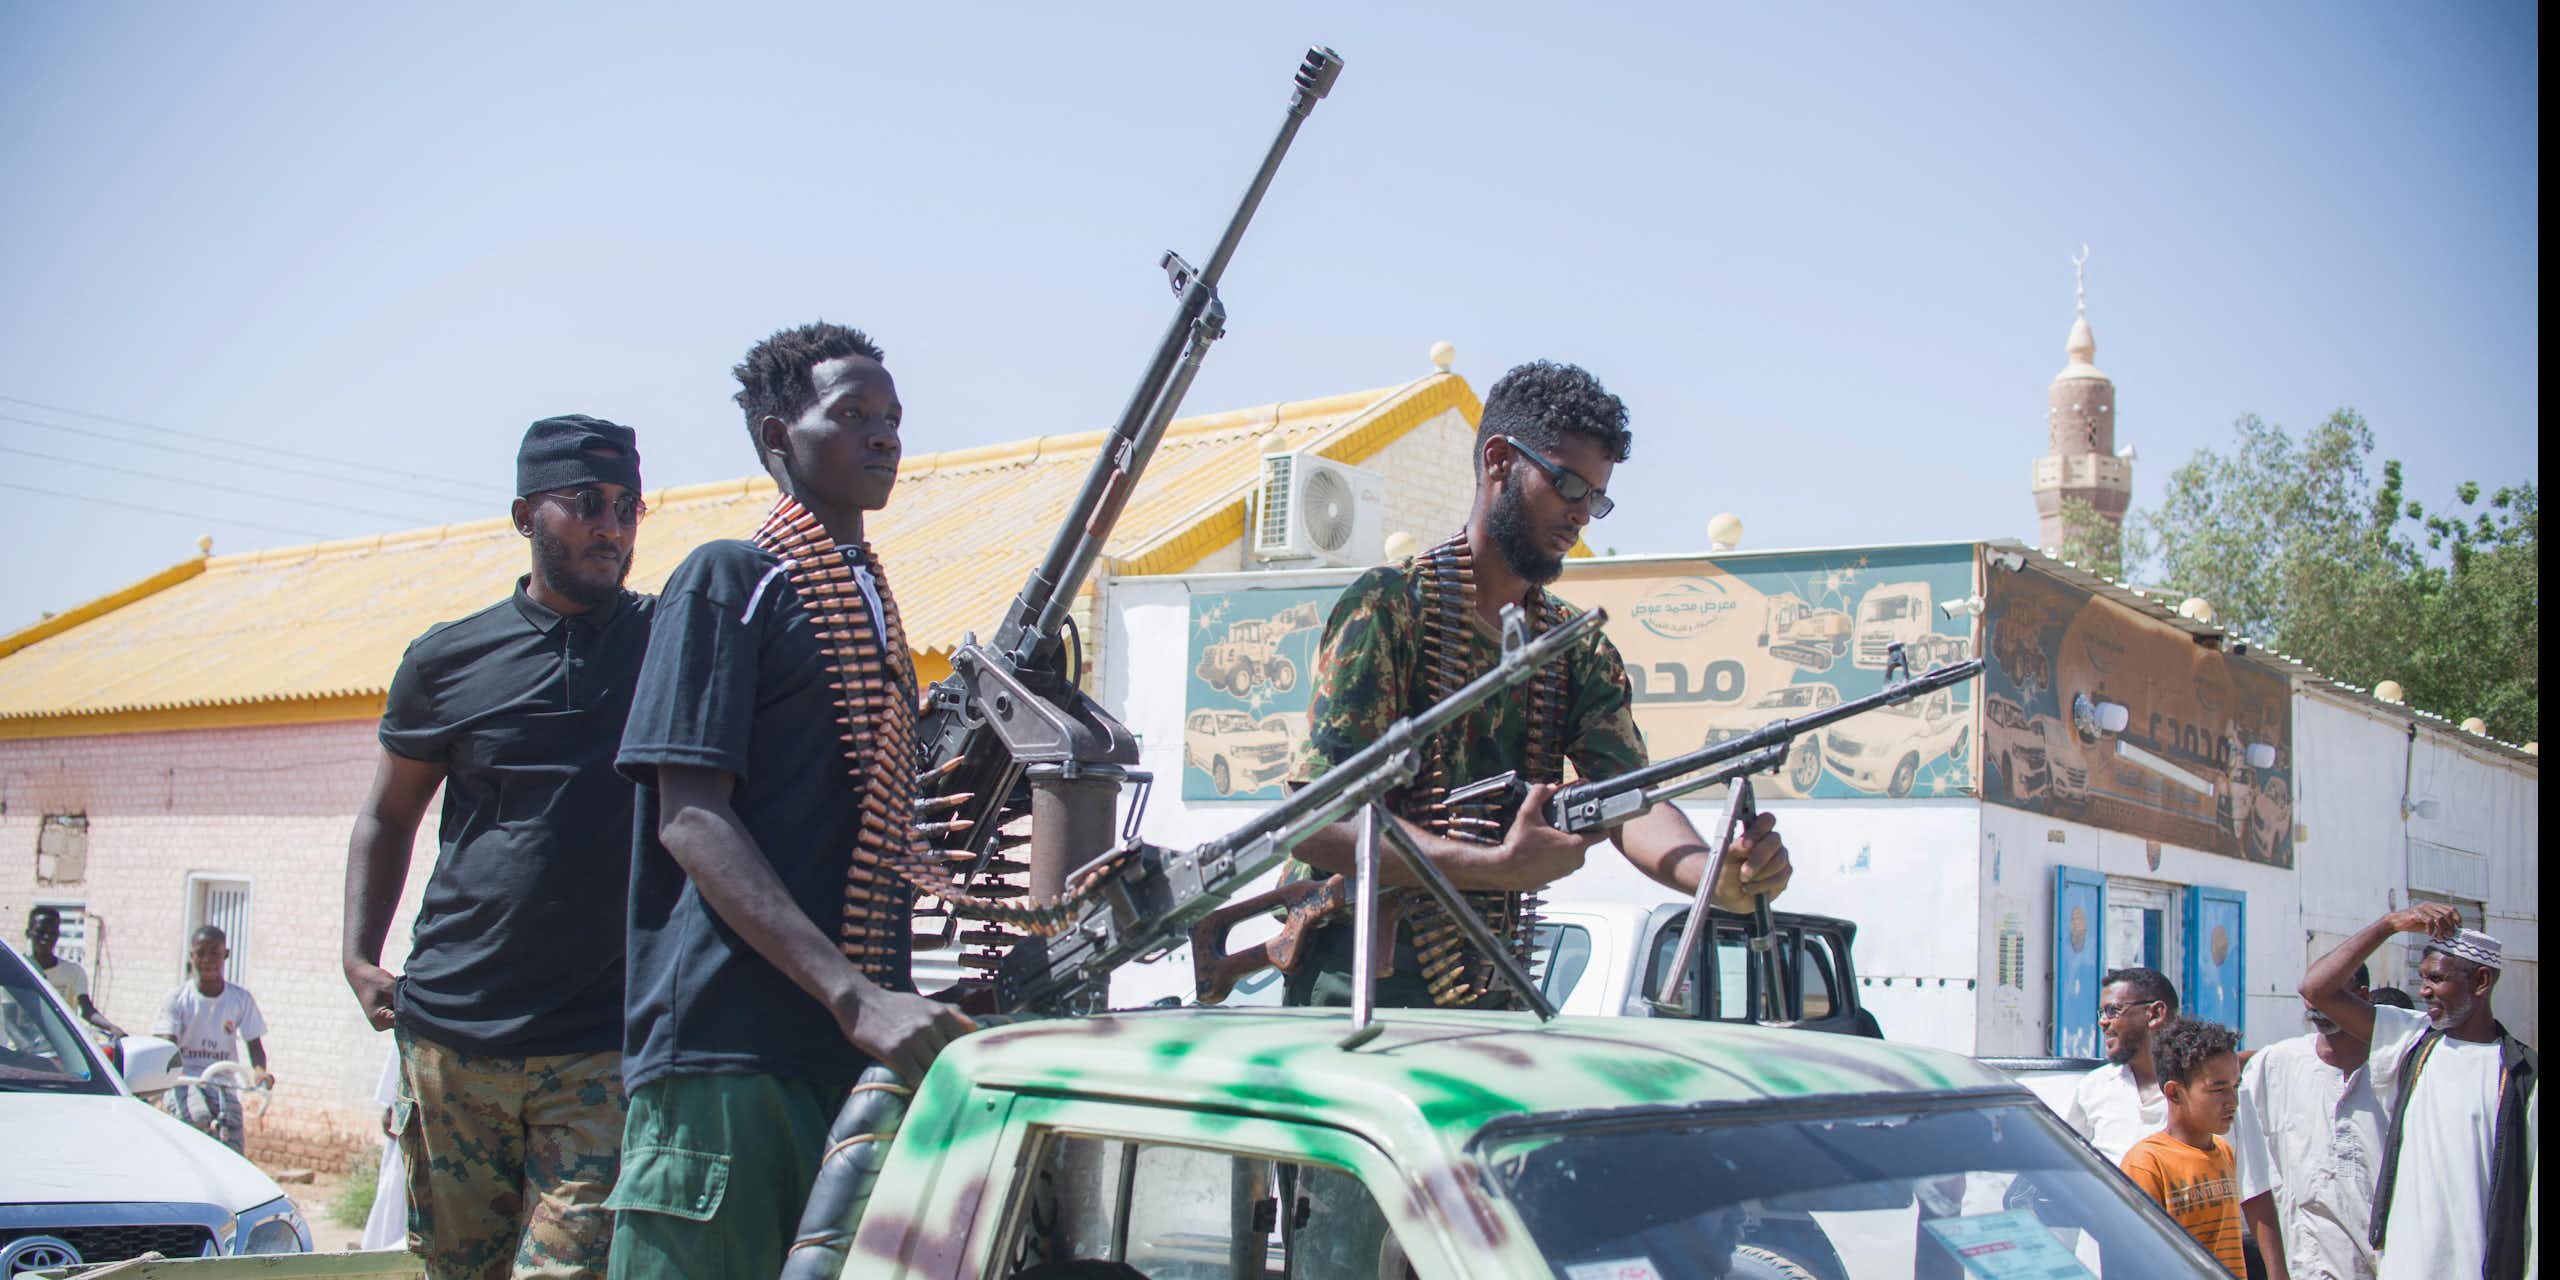 Men on the back of a truck with large guns.